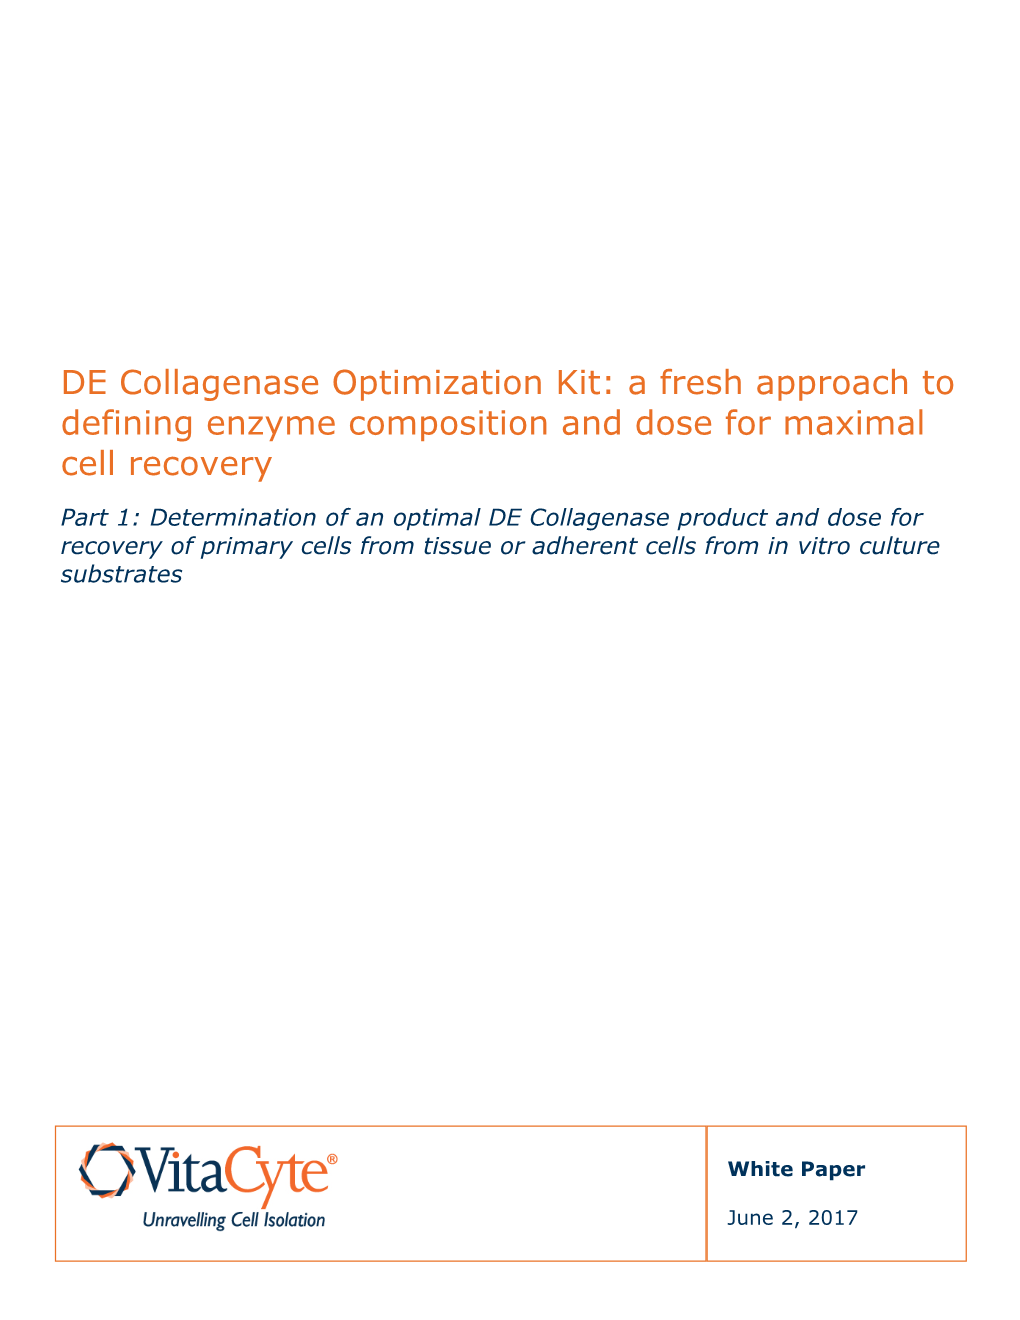 DE Collagenase Optimization Kit: a Fresh Approach to Defining Enzyme Composition and Dose for Maximal Cell Recovery